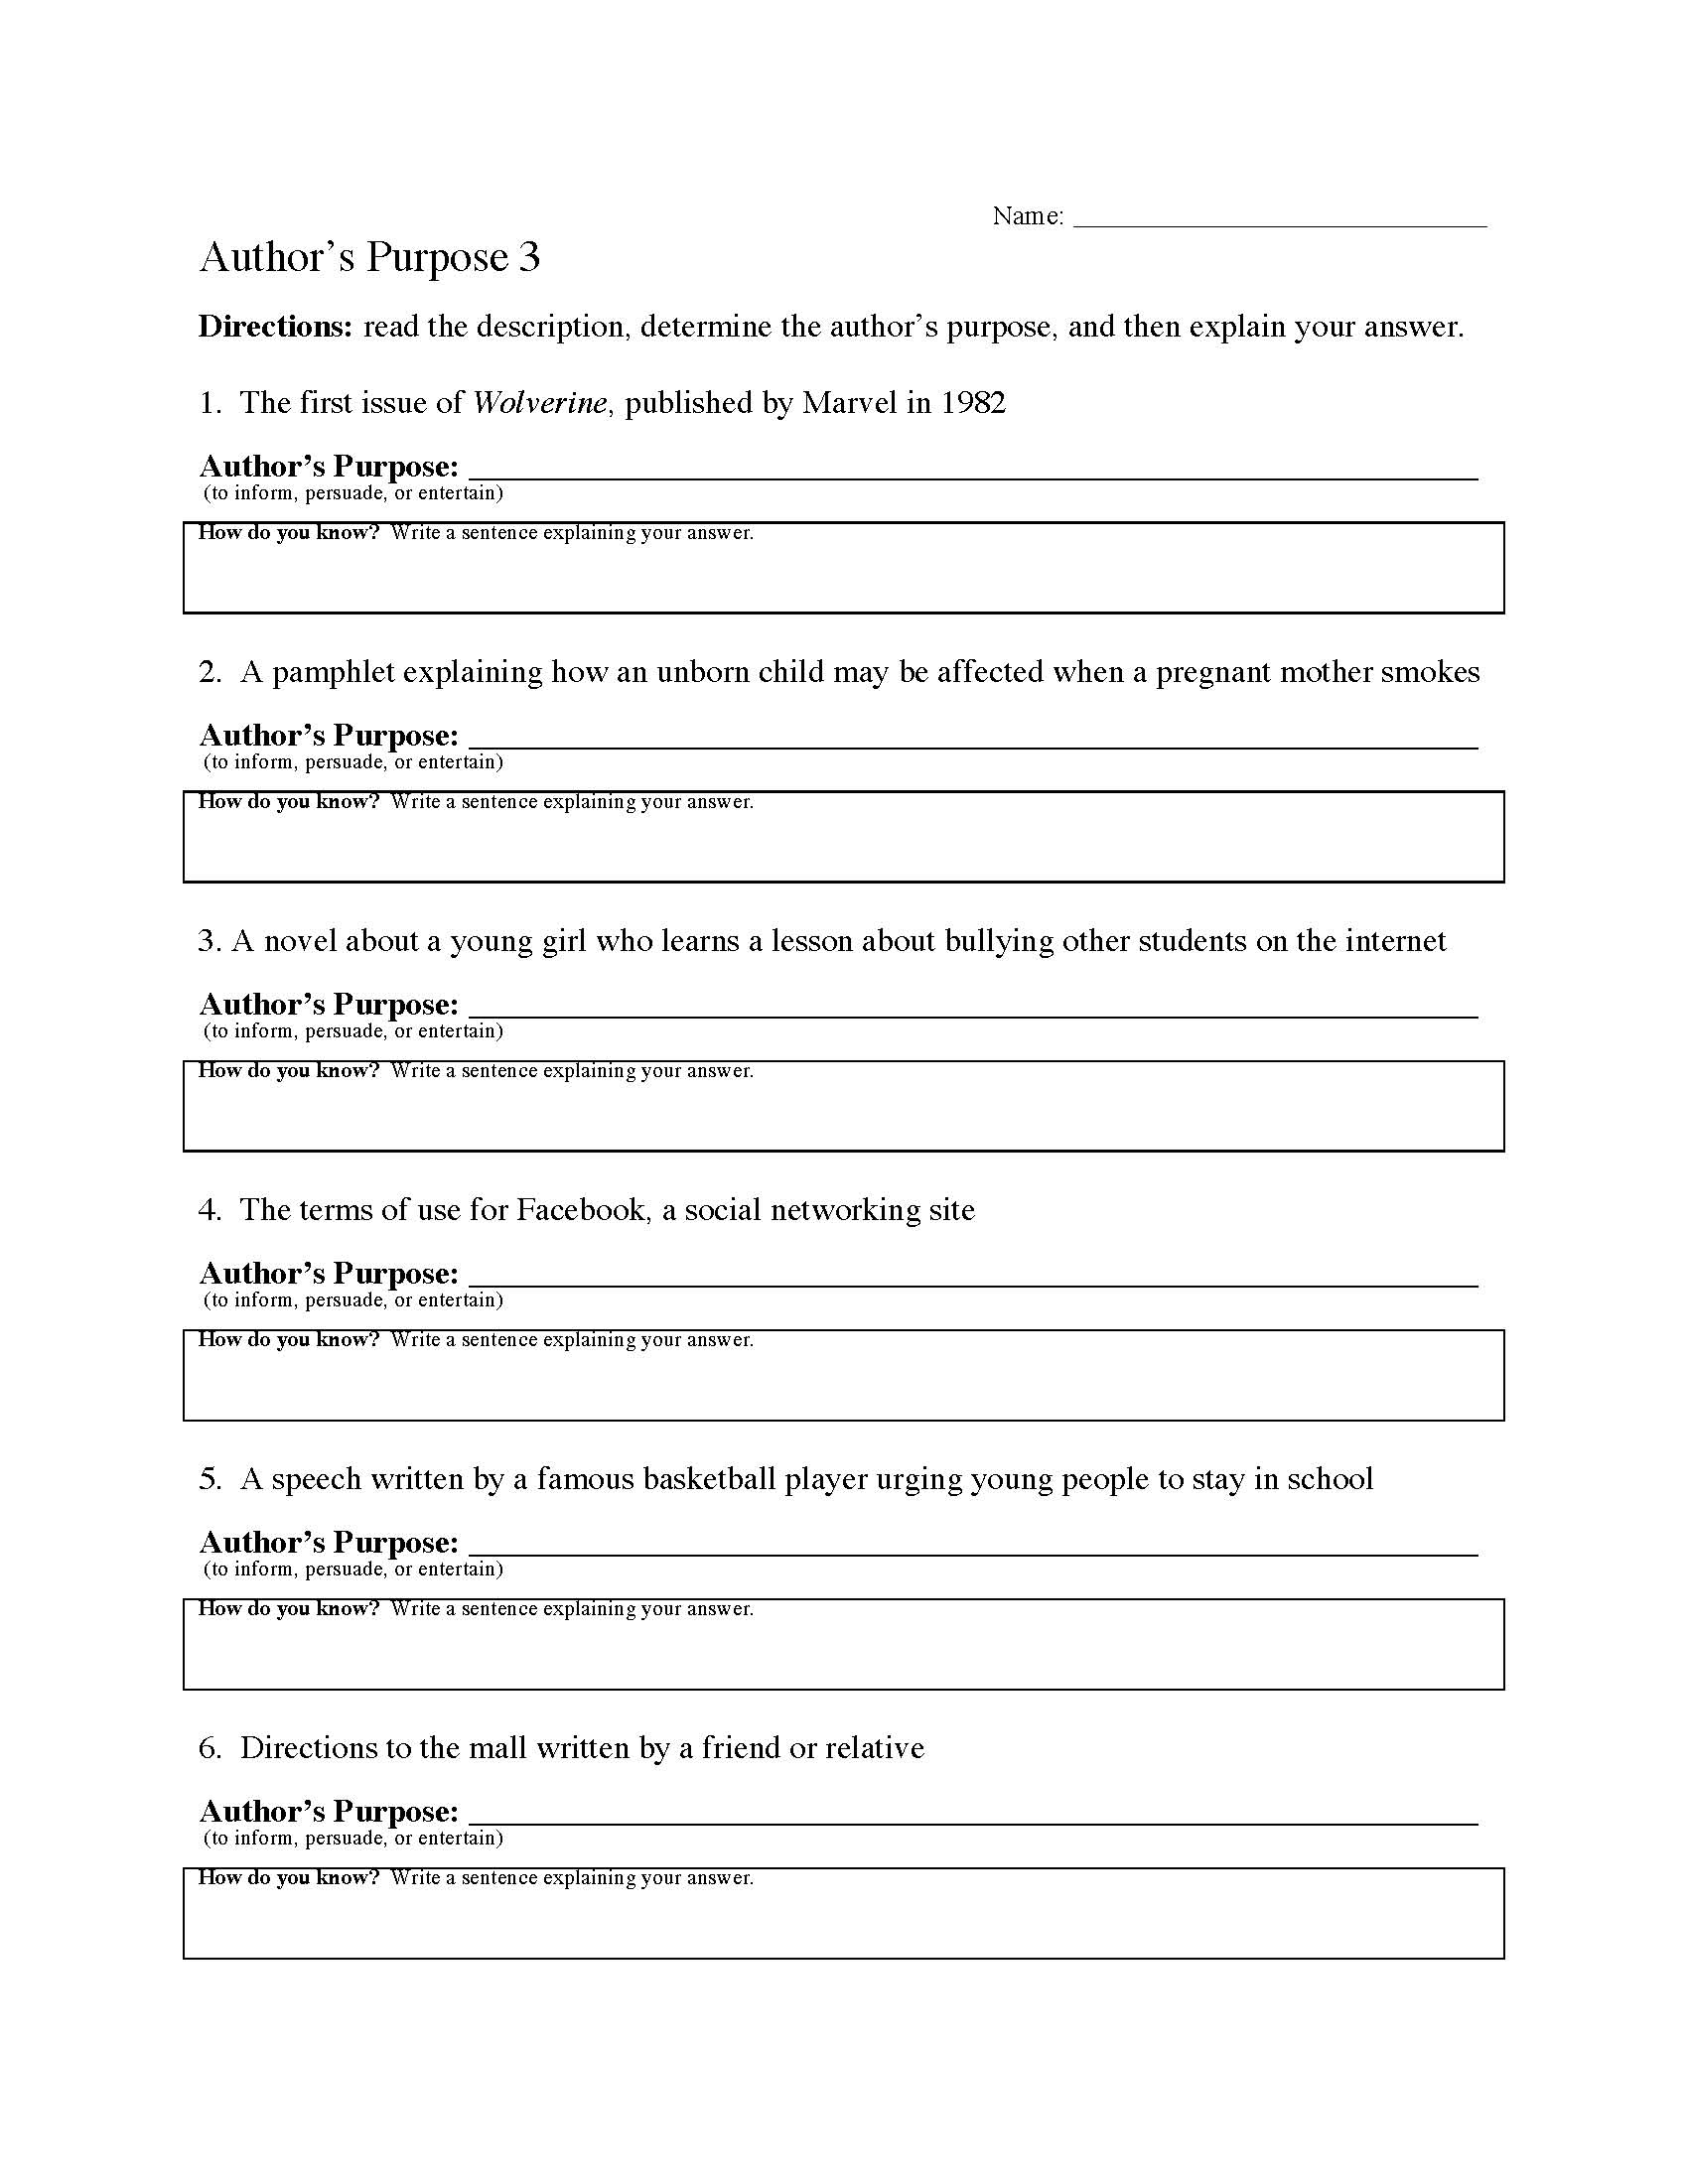 This is a preview image of Author's Purpose Worksheet 3. Click on it to enlarge it or view the source file.